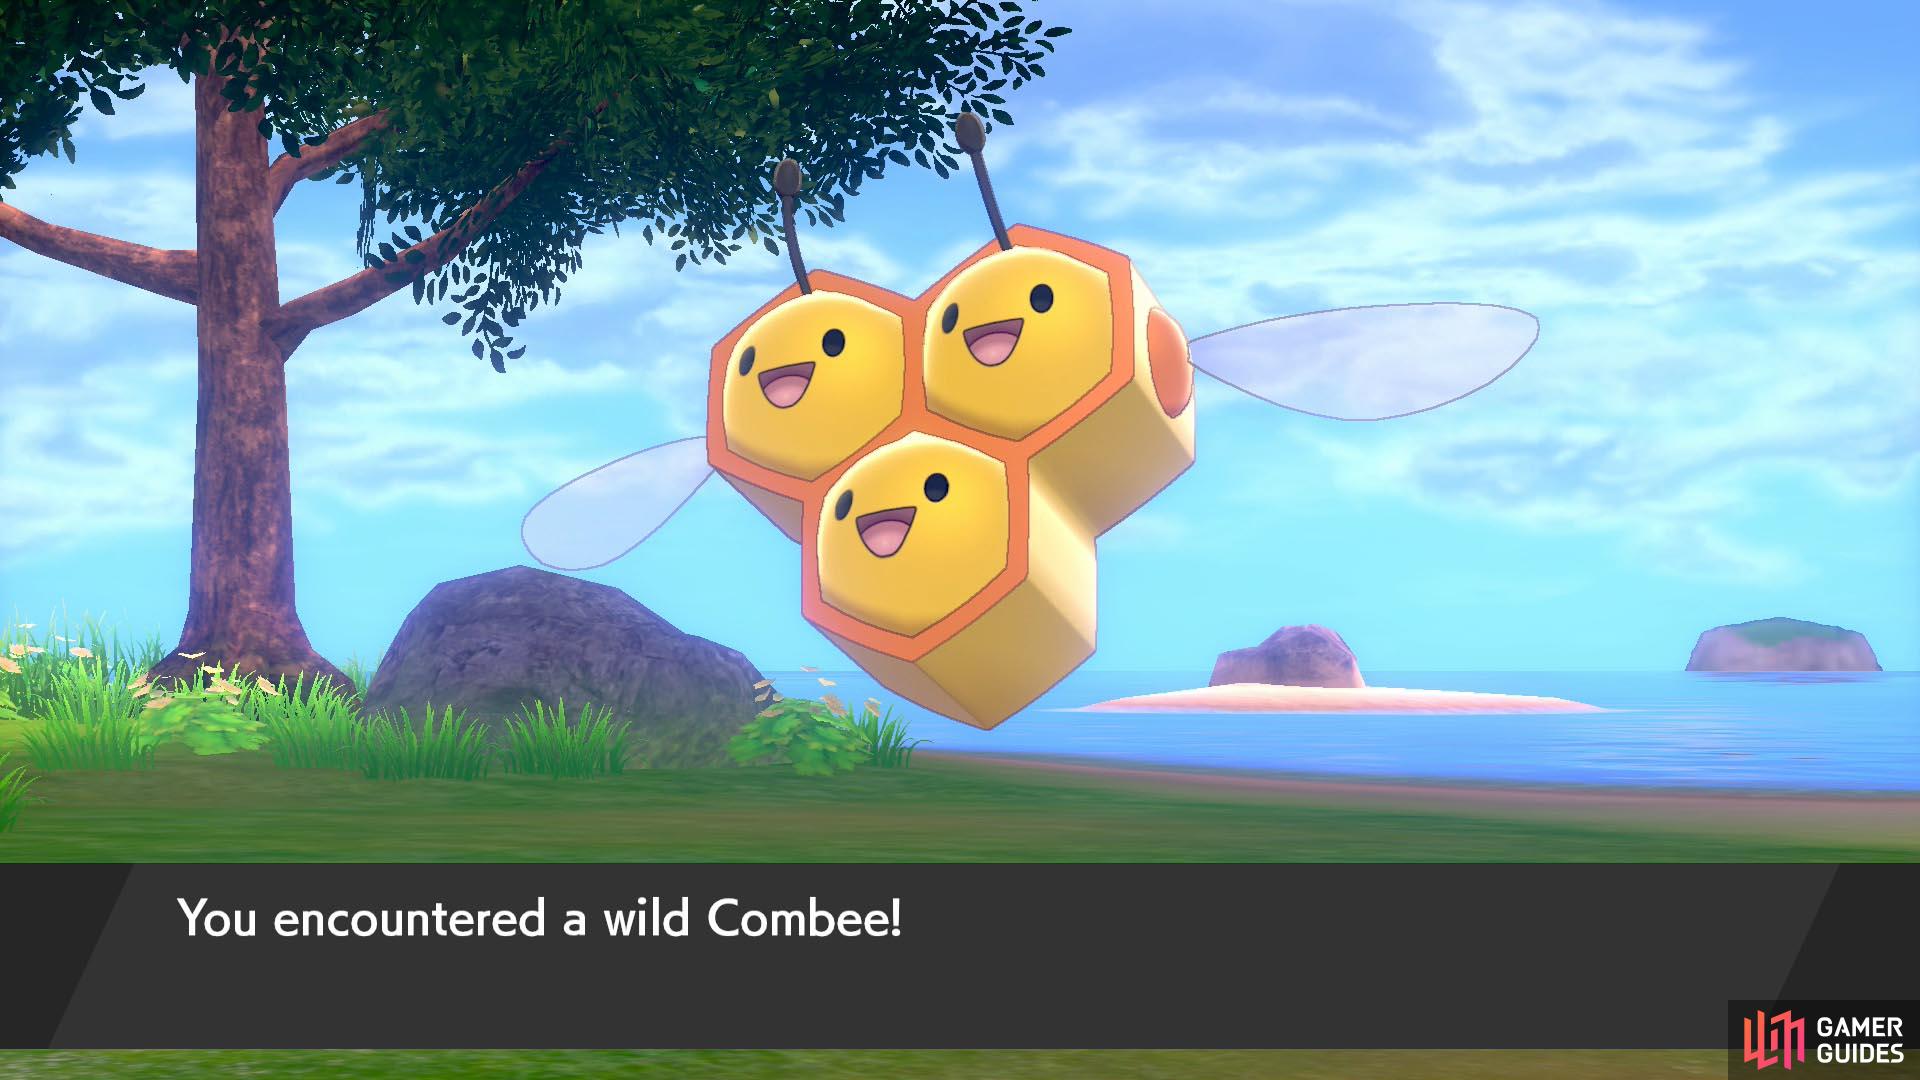 Combee are everywhere. By the way, only female ones can evolve.